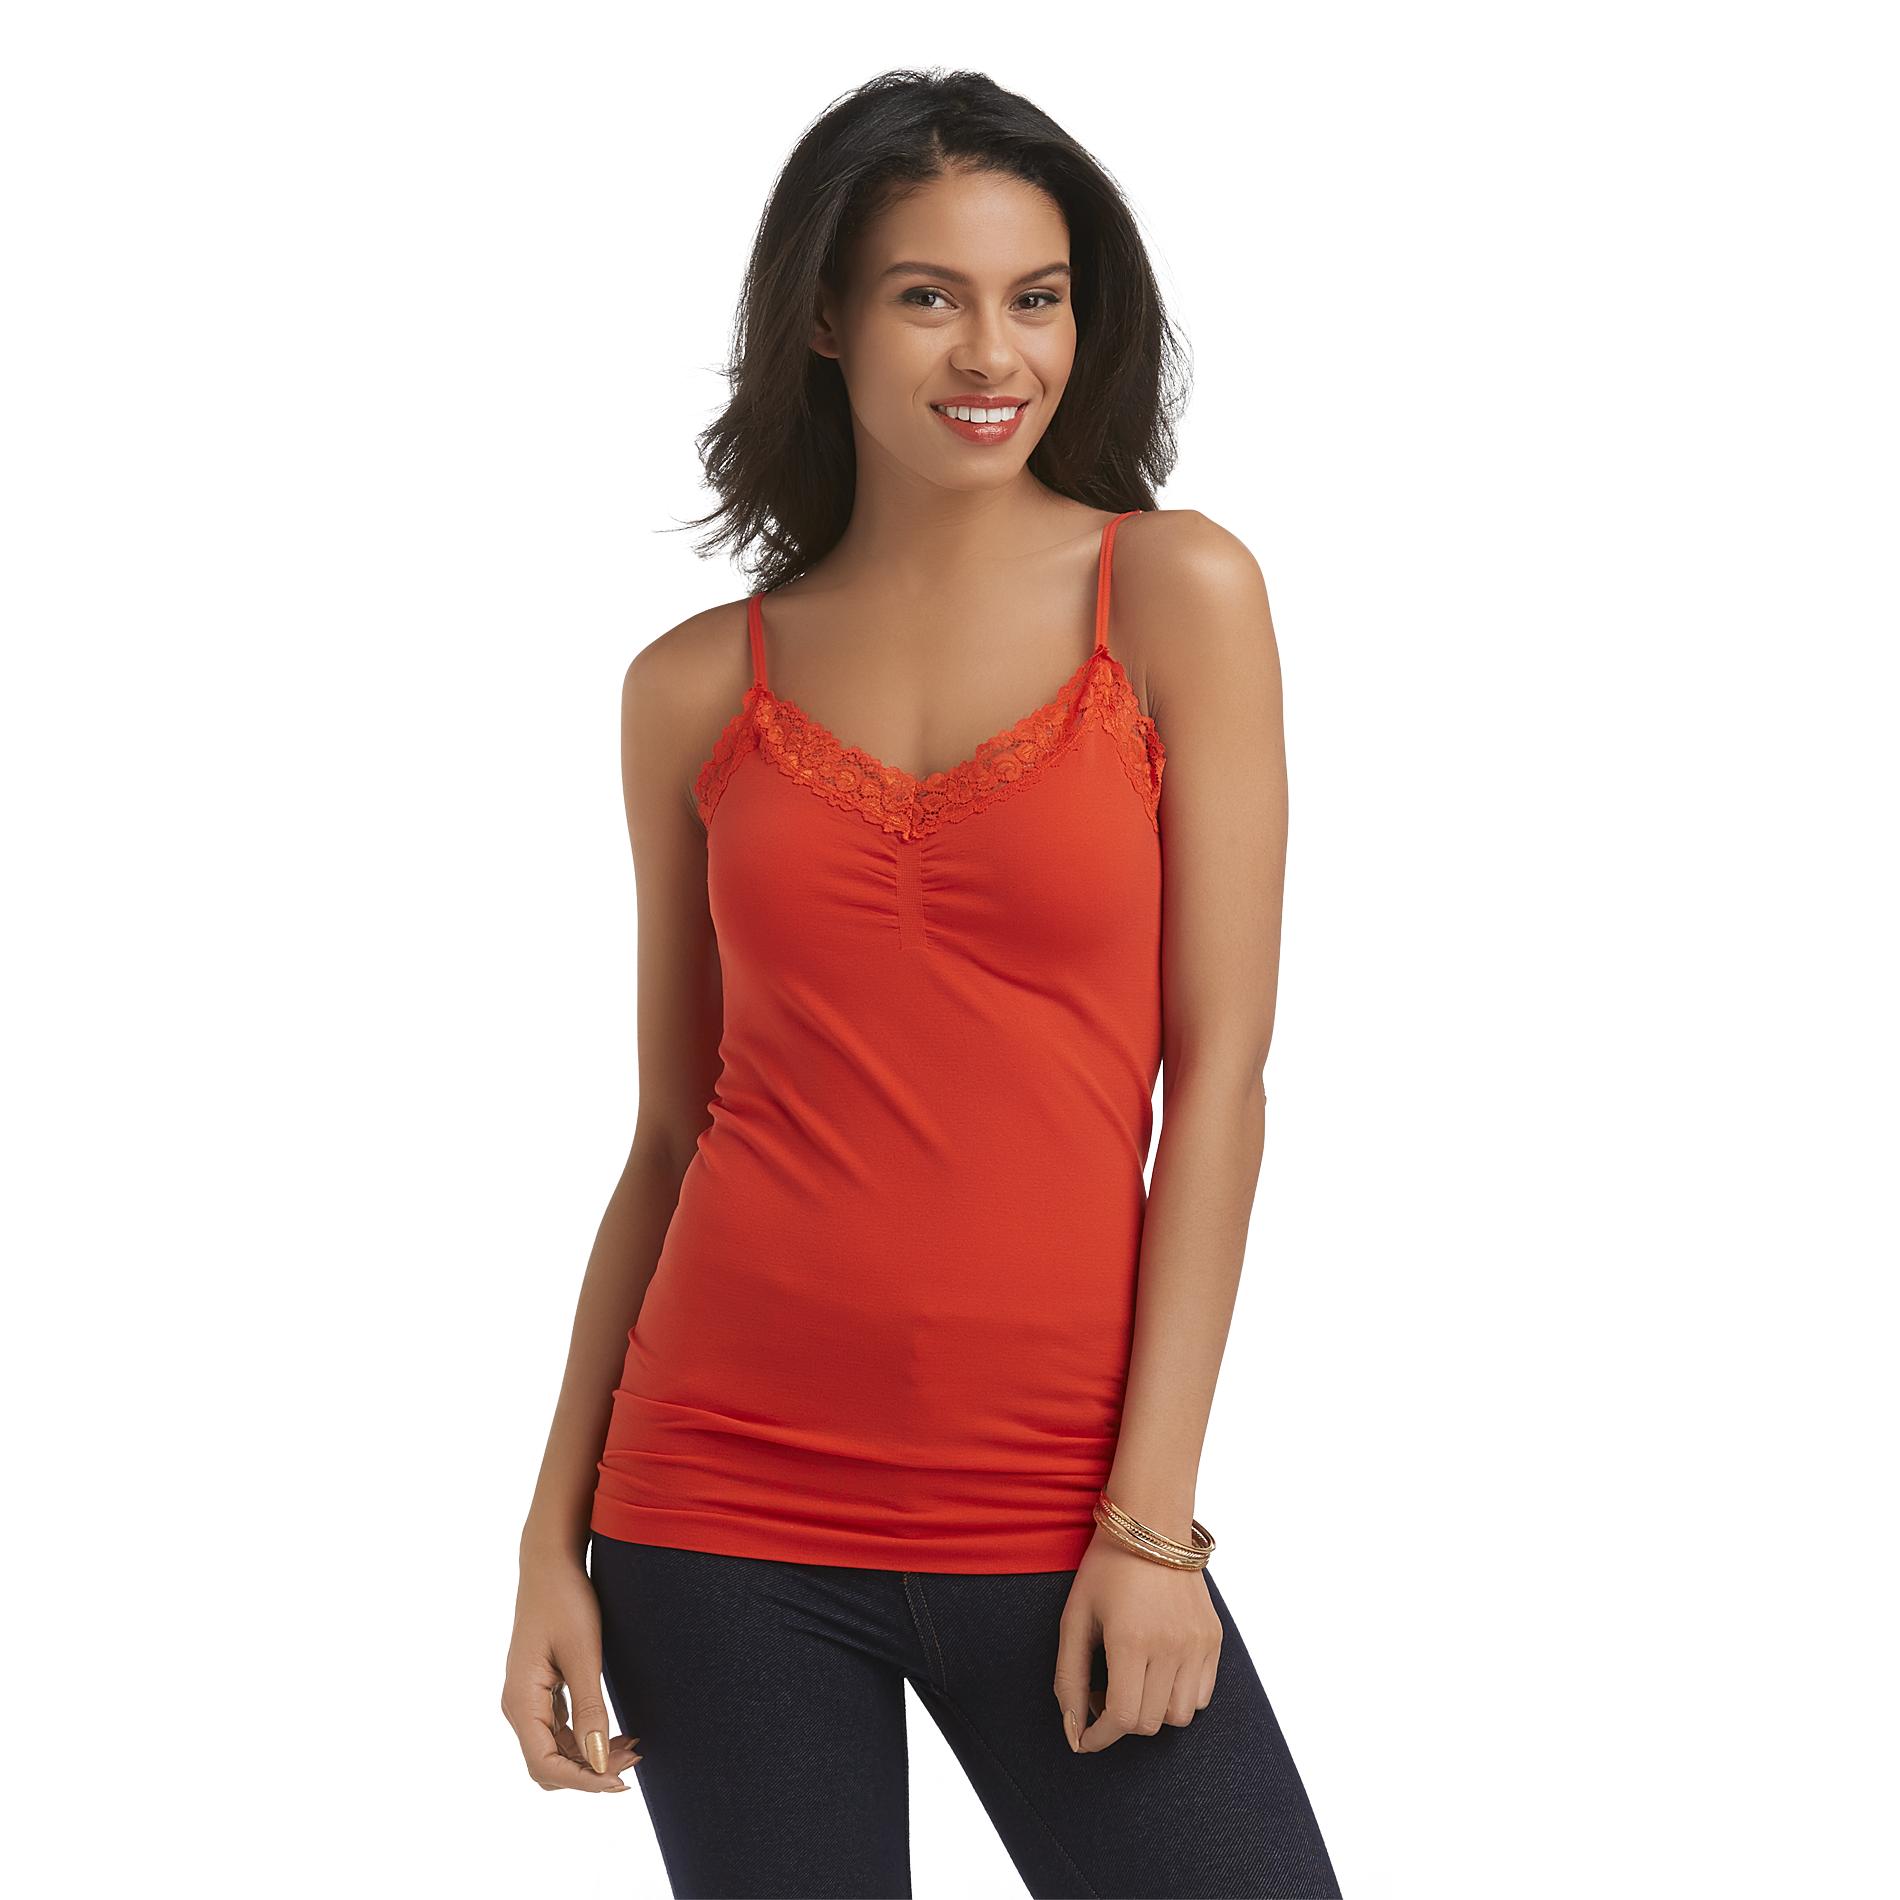 Attention Women's V-Neck Camisole